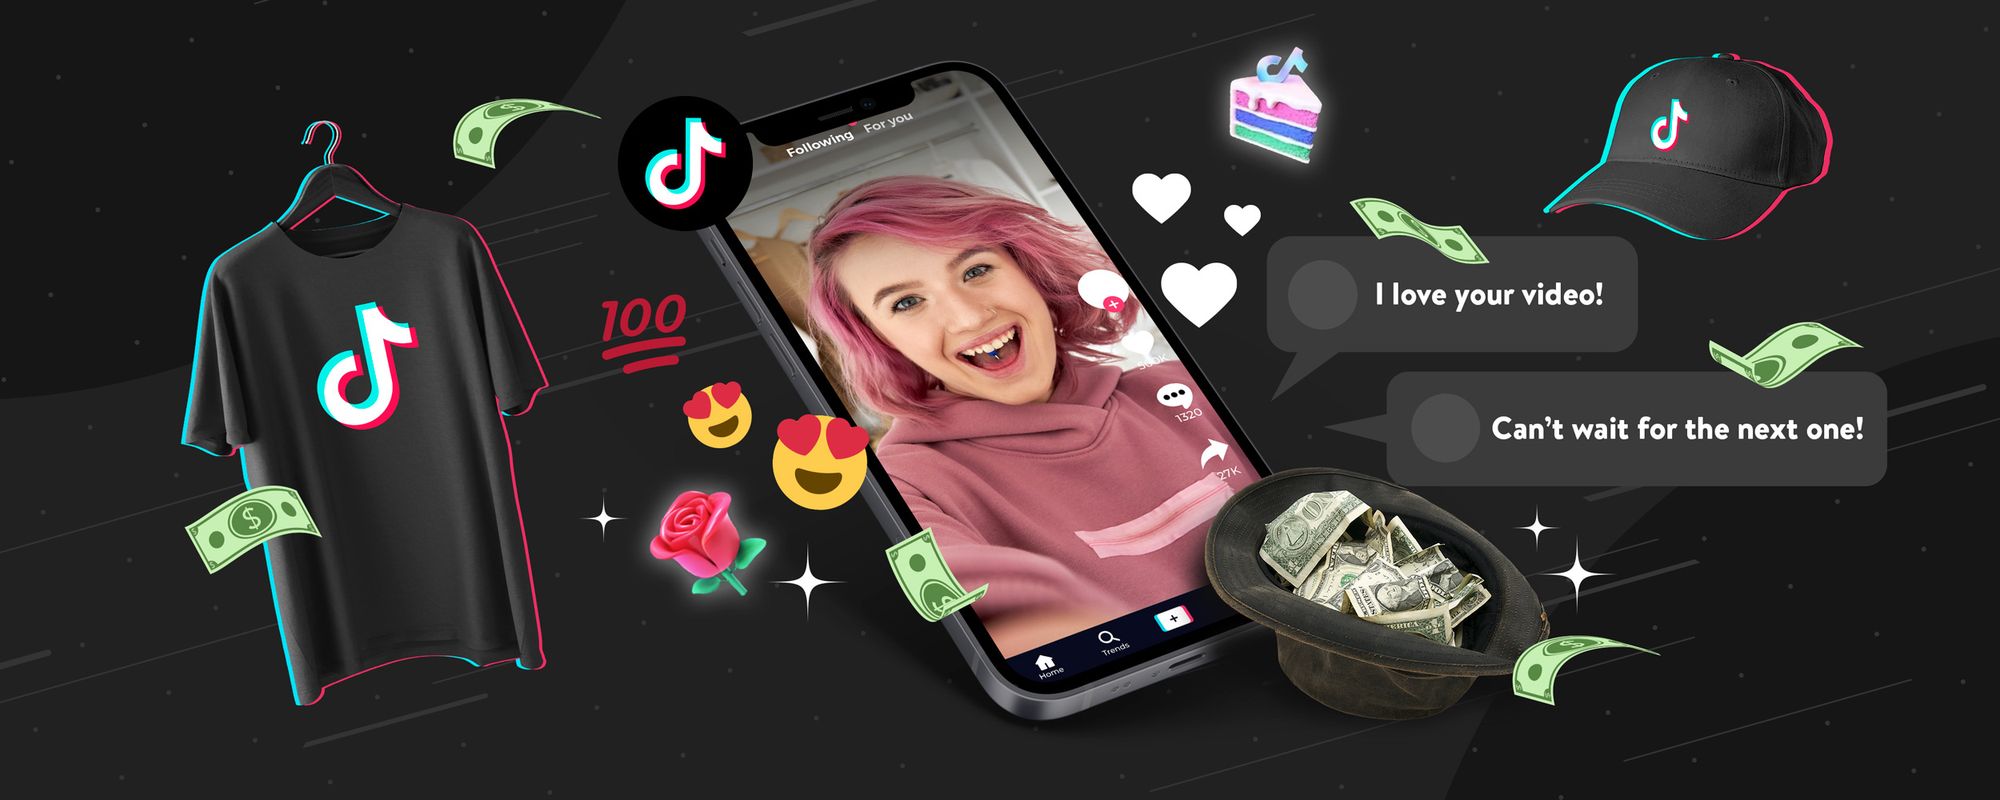 Examples of different ways creators can make money on TikTok, including Tips and selling merch.